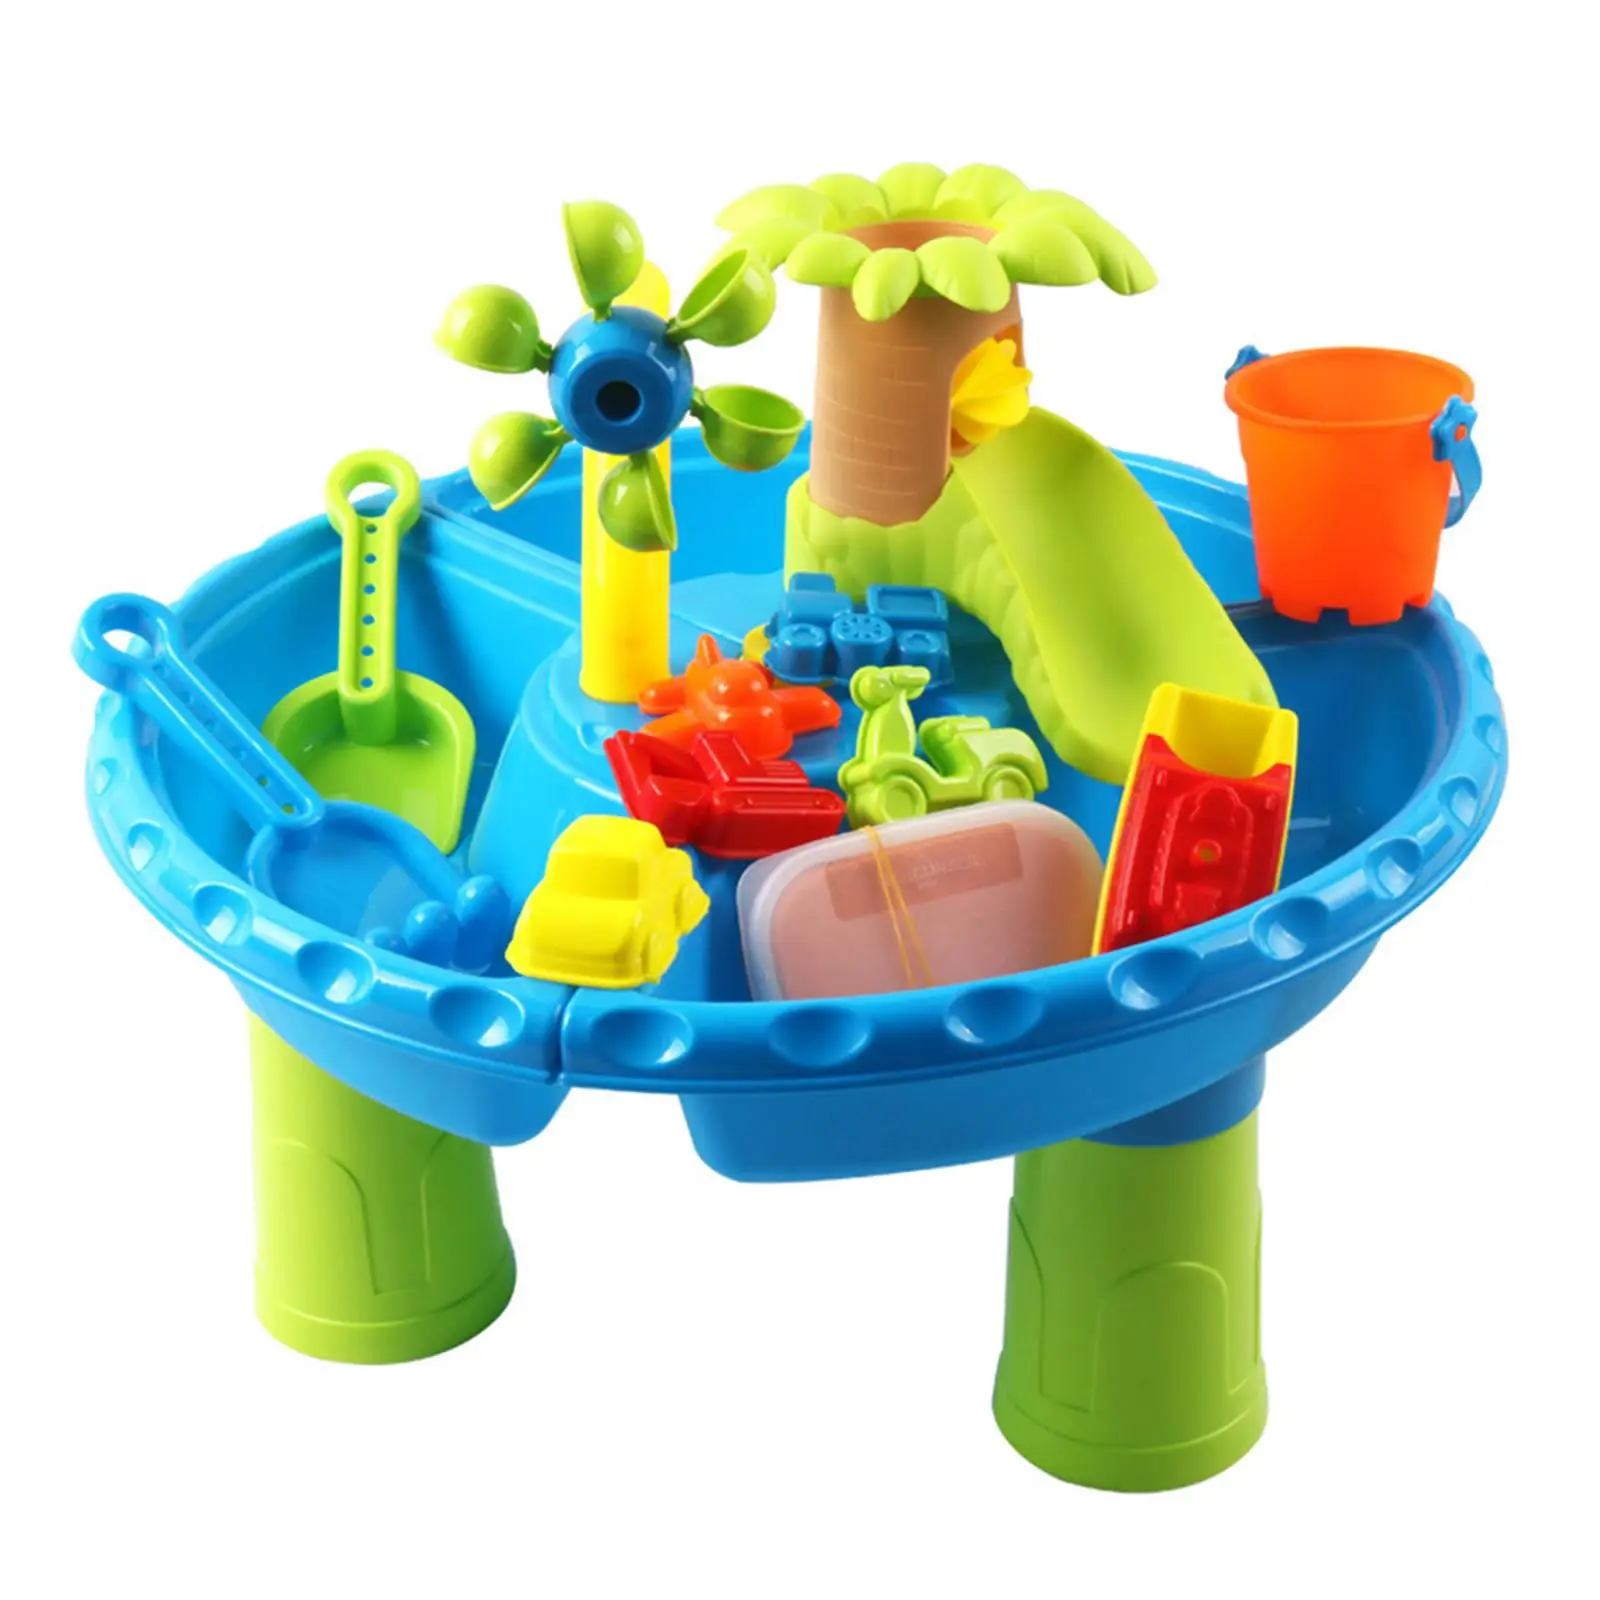  Kids Sand And Water Table - Beach Play Activity Table for Toddlers Sensory Table Beach Toys for Kids Play Sand Table